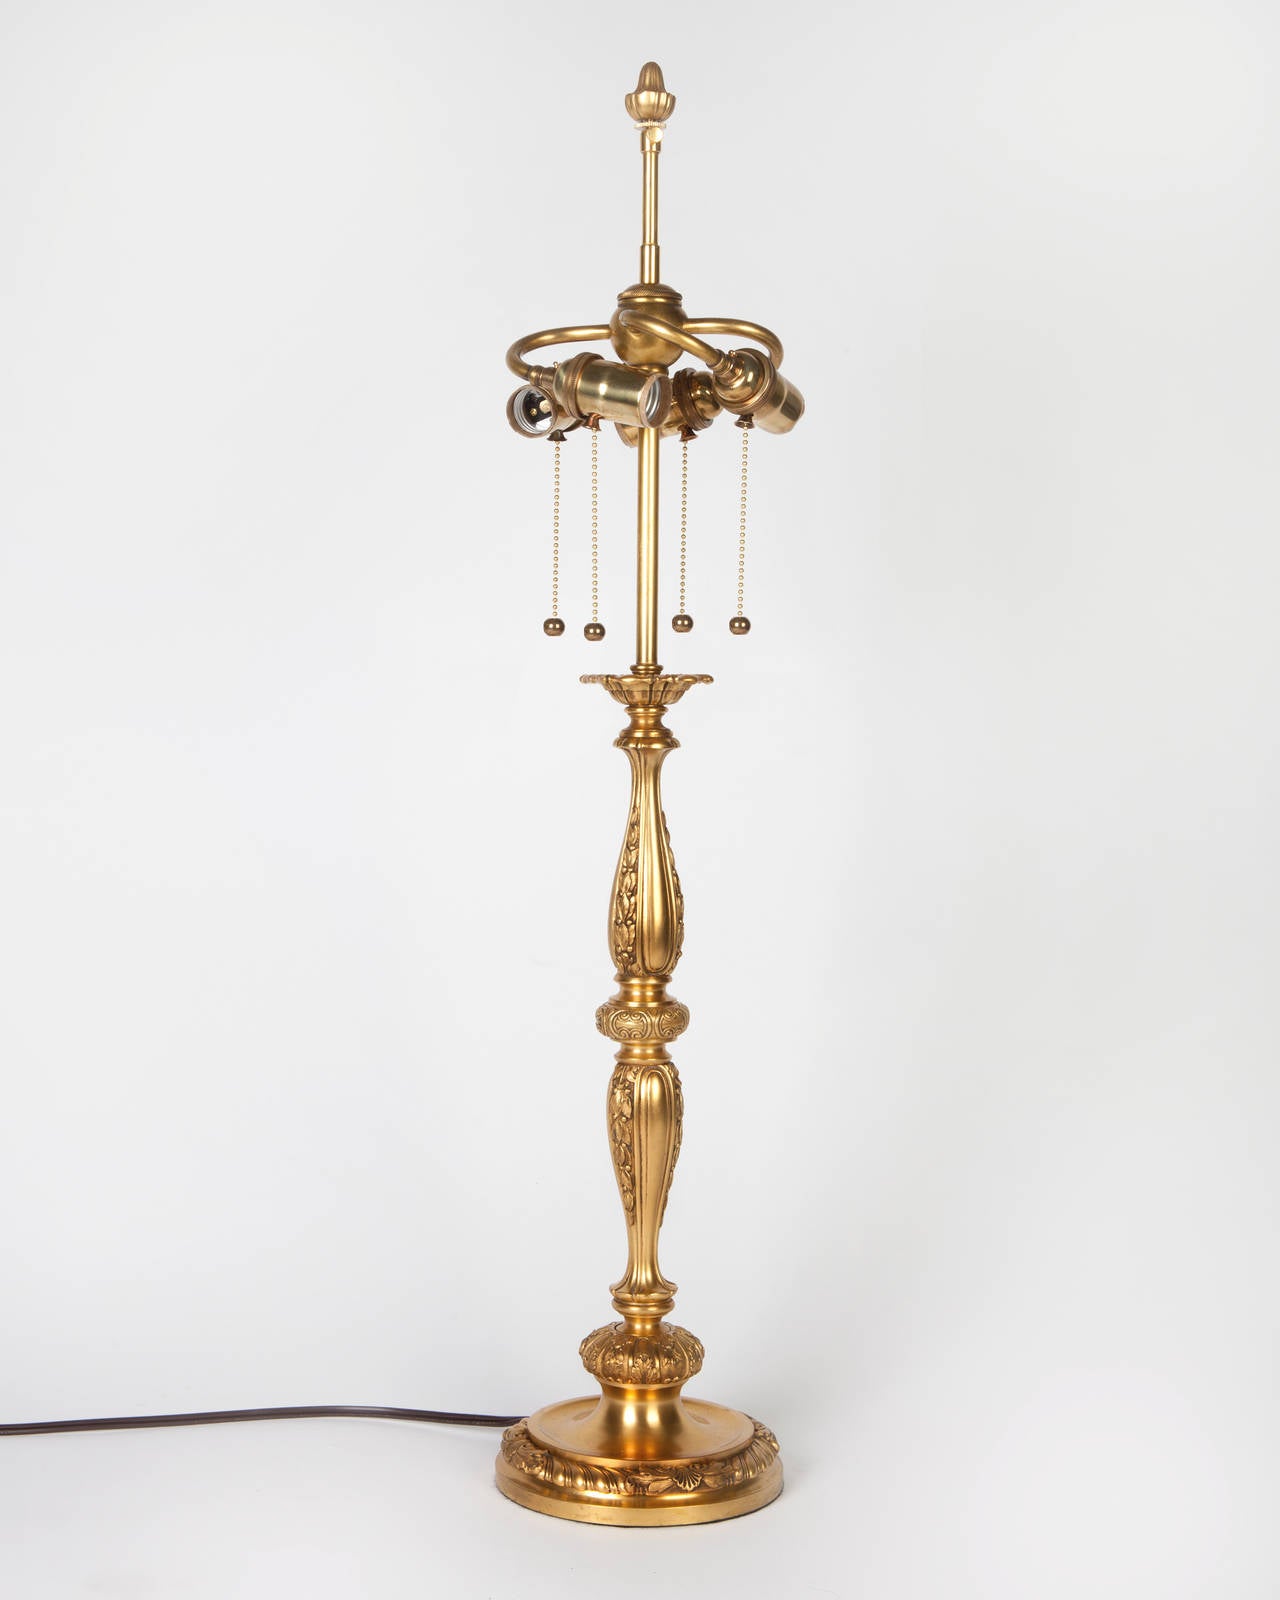 ATL1888
A slender baluster form table lamp detailed with bellflowers, rope-twists, and shells, in its original gilded finish. Signed by the New York maker Sterling Bronze Co.

Dimensions:
Overall: 32-3/4